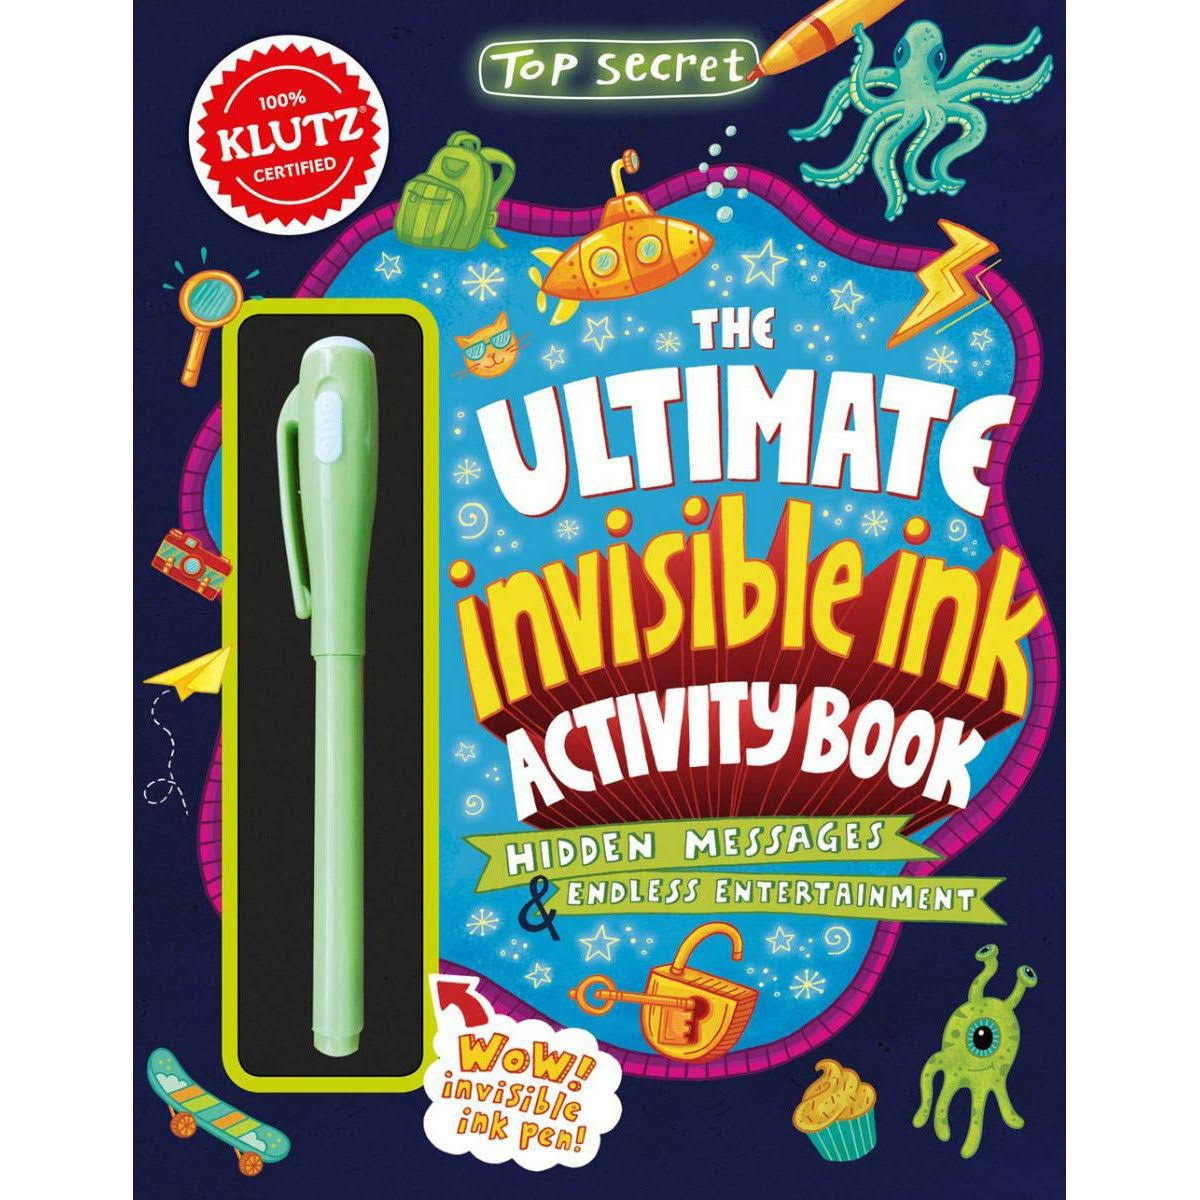 Top Secret: the Ultimate Invisible Ink Activity Book (Klutz Activity Book) [Book]